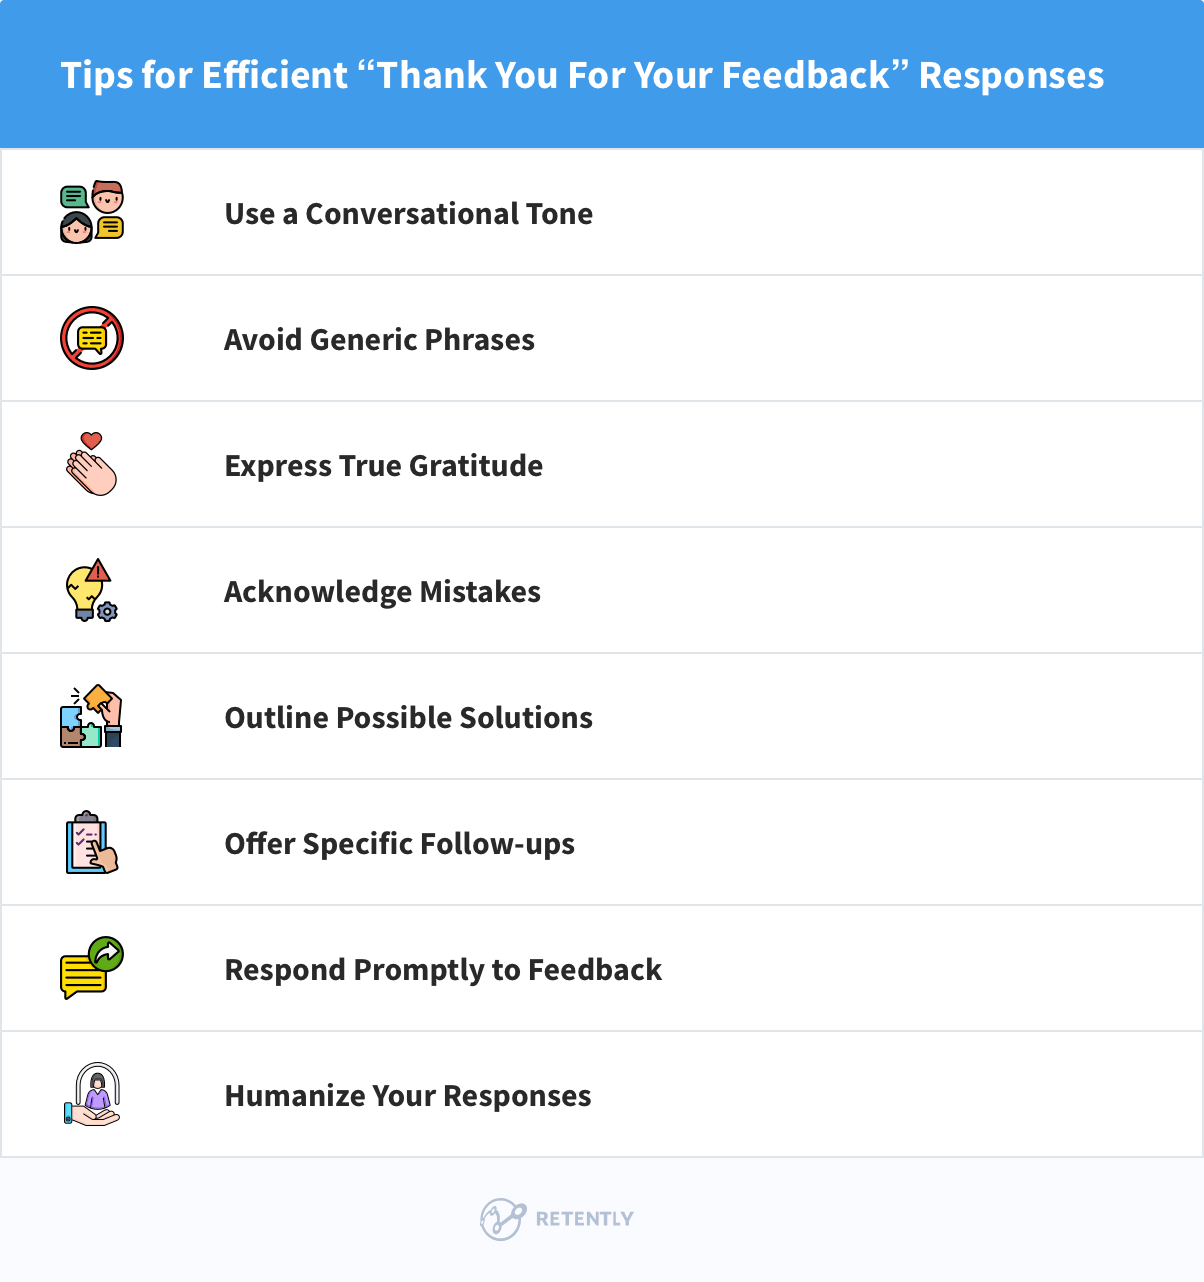 Tips for Efficient “Thank You For Your Feedback” Responses